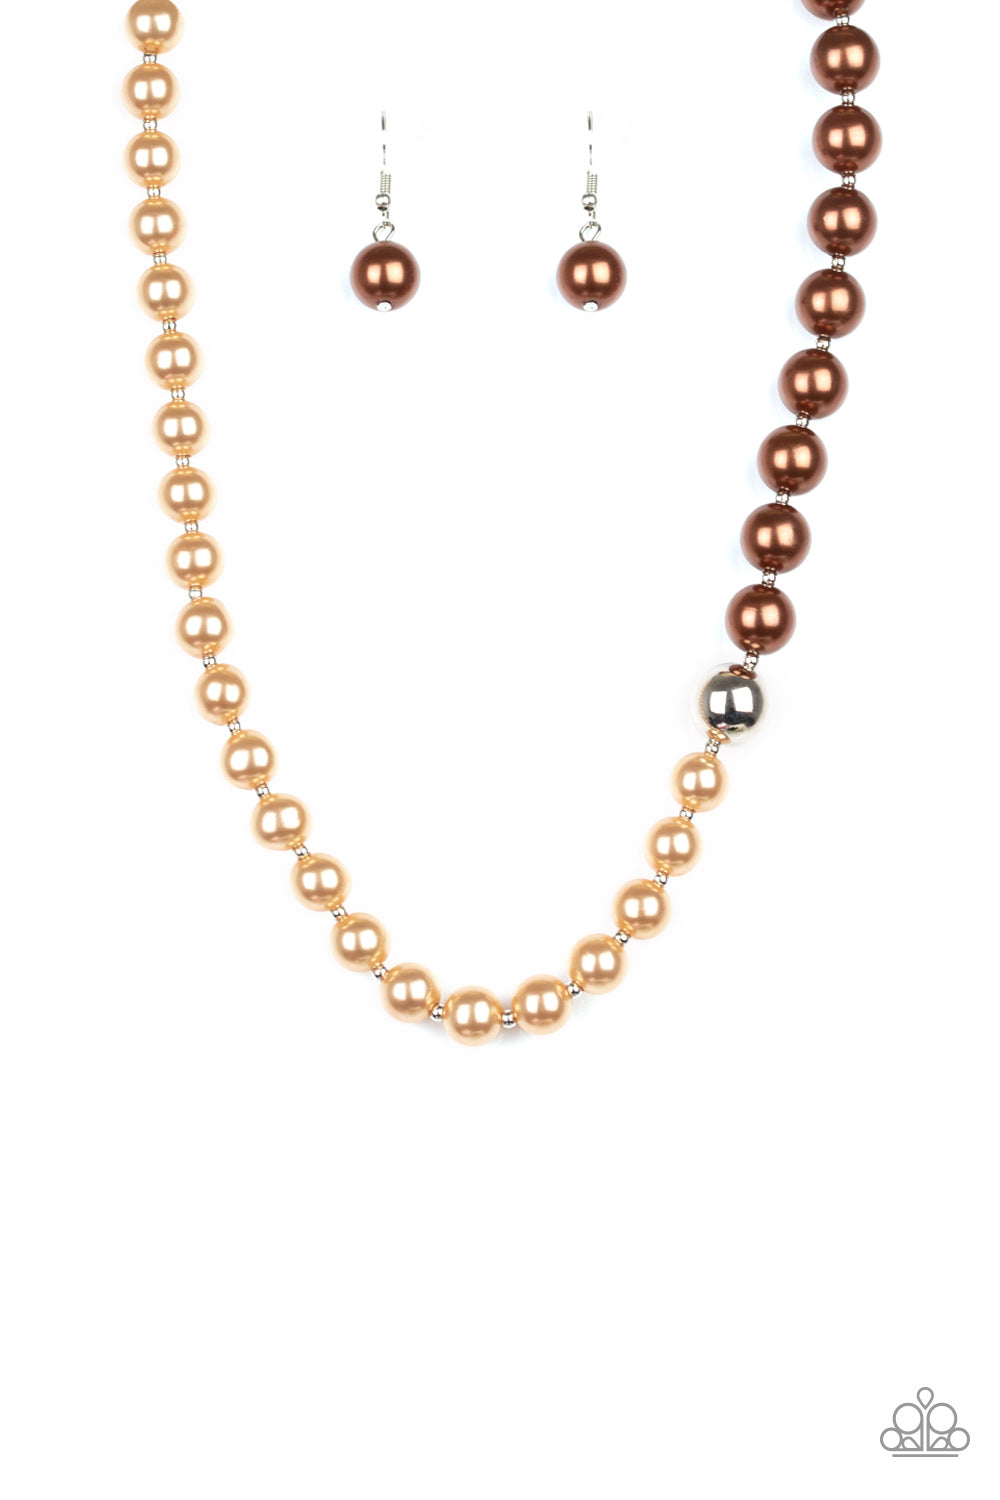 Paparazzi 5th Avenue A-Lister - Brown Necklace